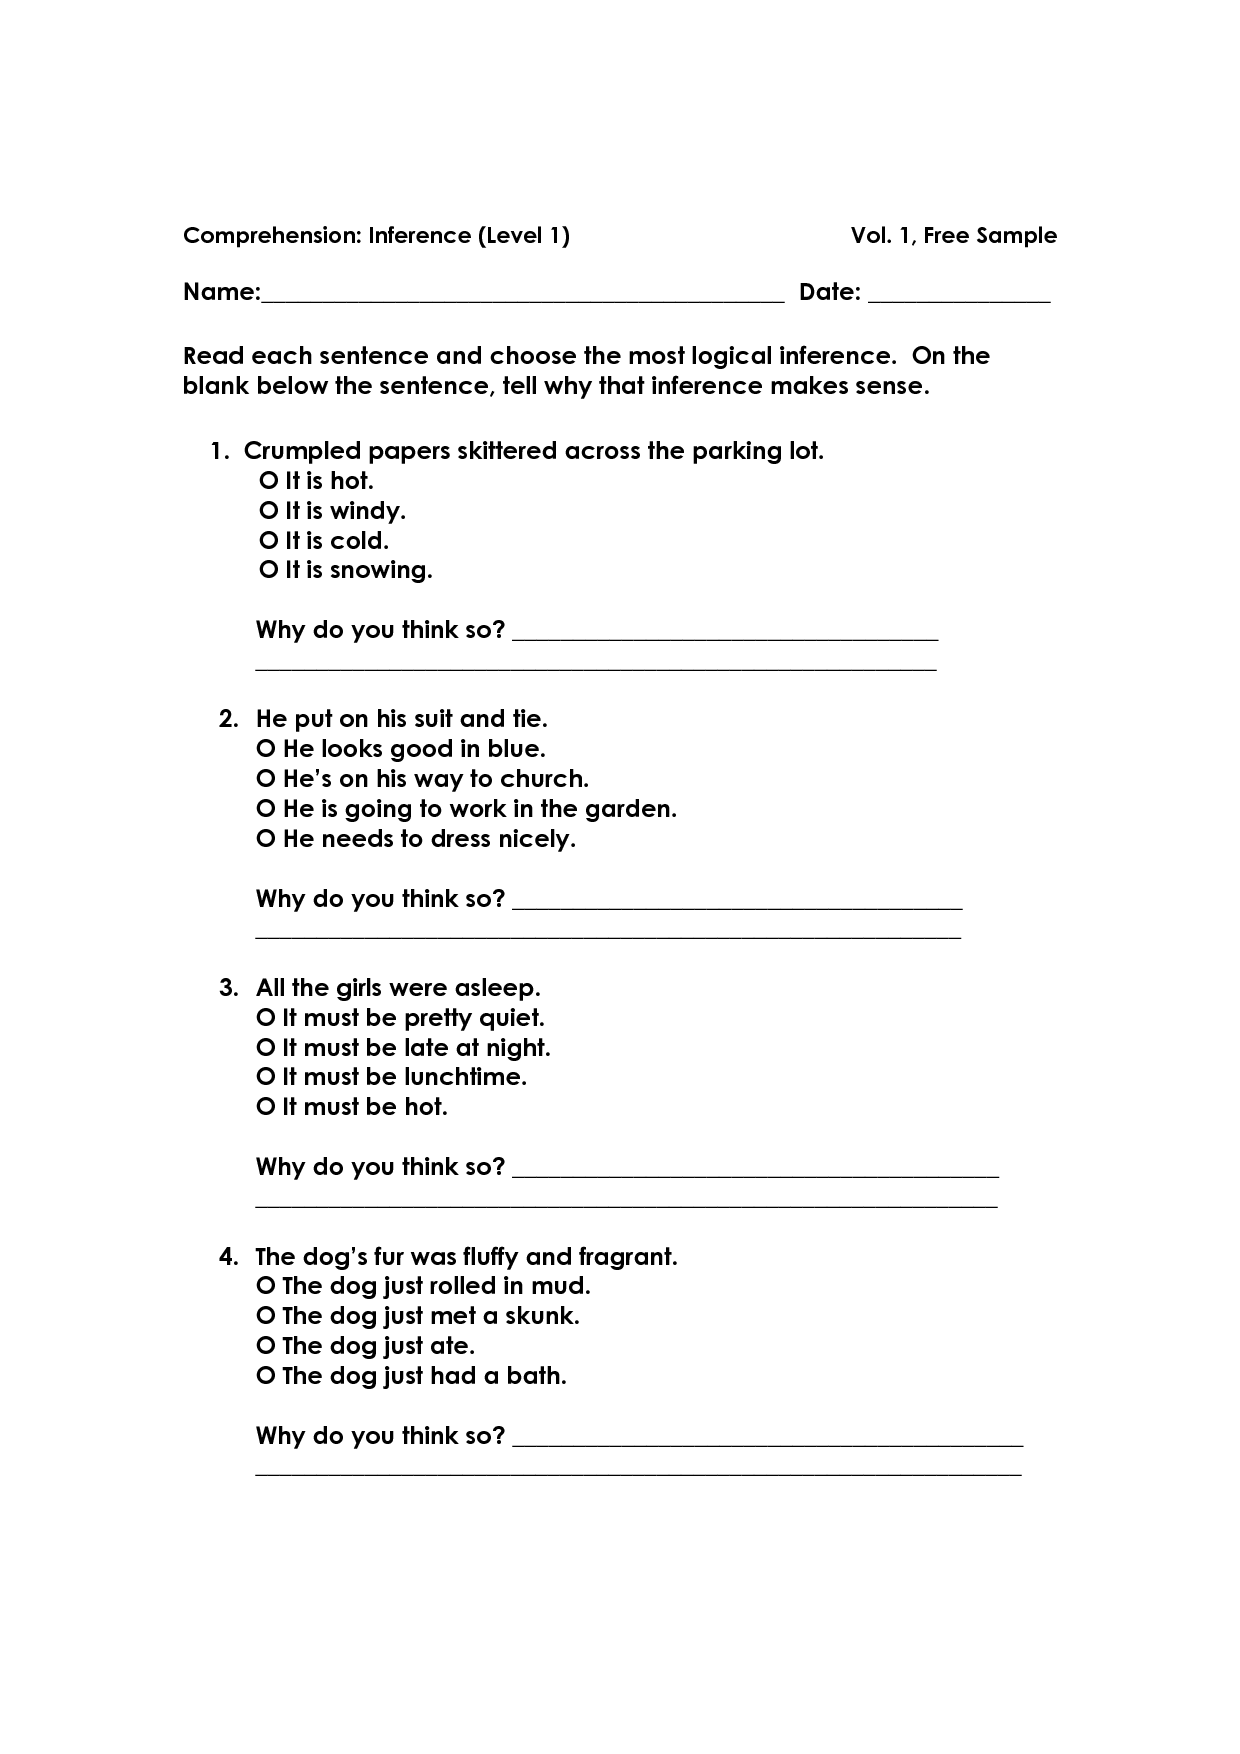 15-best-images-of-vocabulary-inference-worksheet-reading-vocabulary